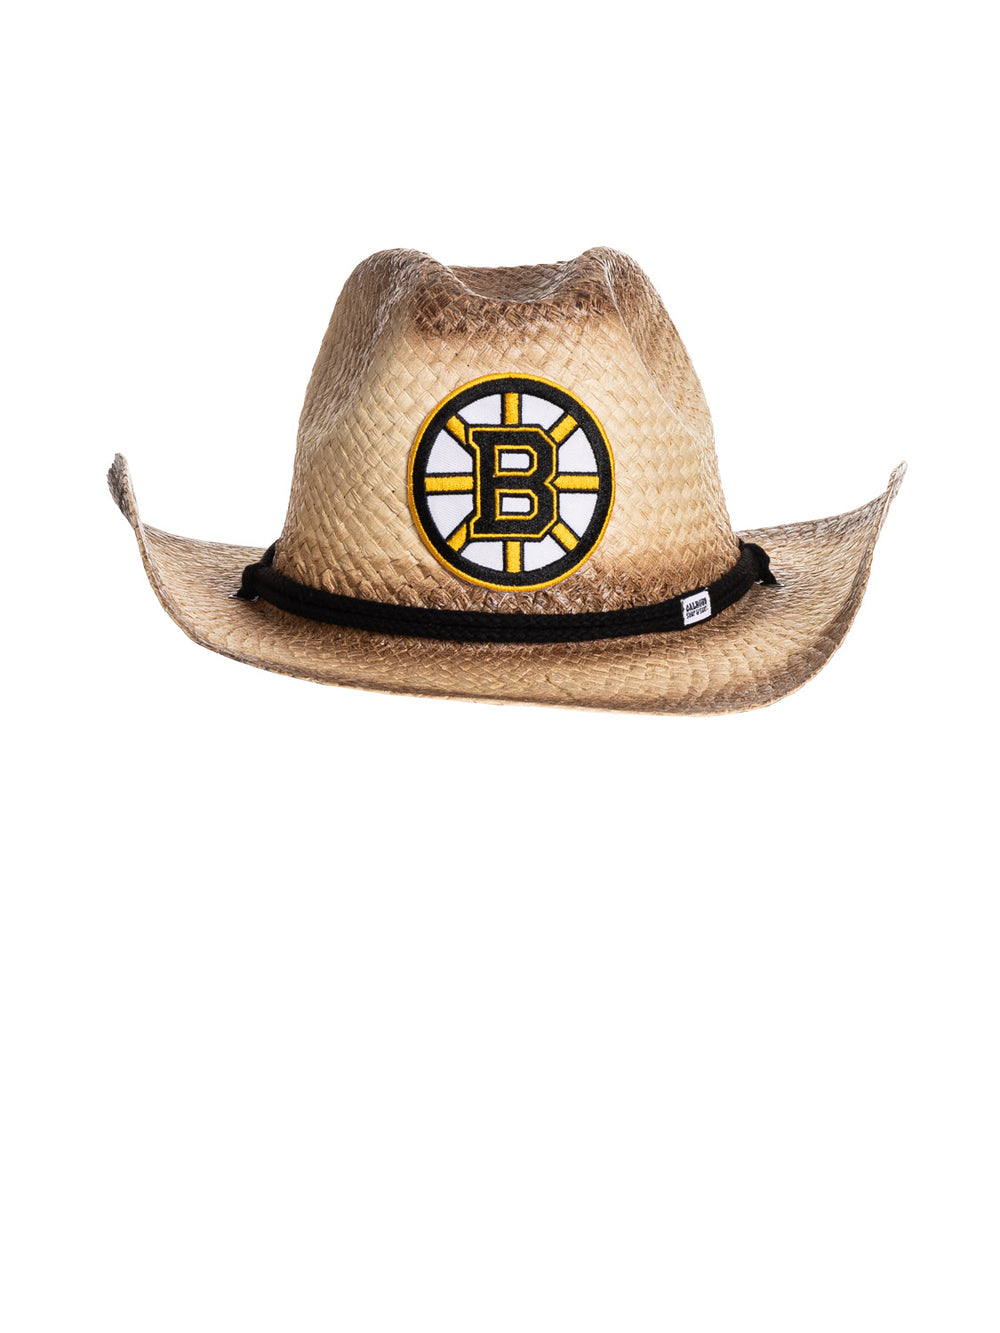 The front of the Boston Bruins straw cowboy hat. It is a tan straw hat with the Bruins logo in the centre of it, with a black rope running along the crown of the hat.